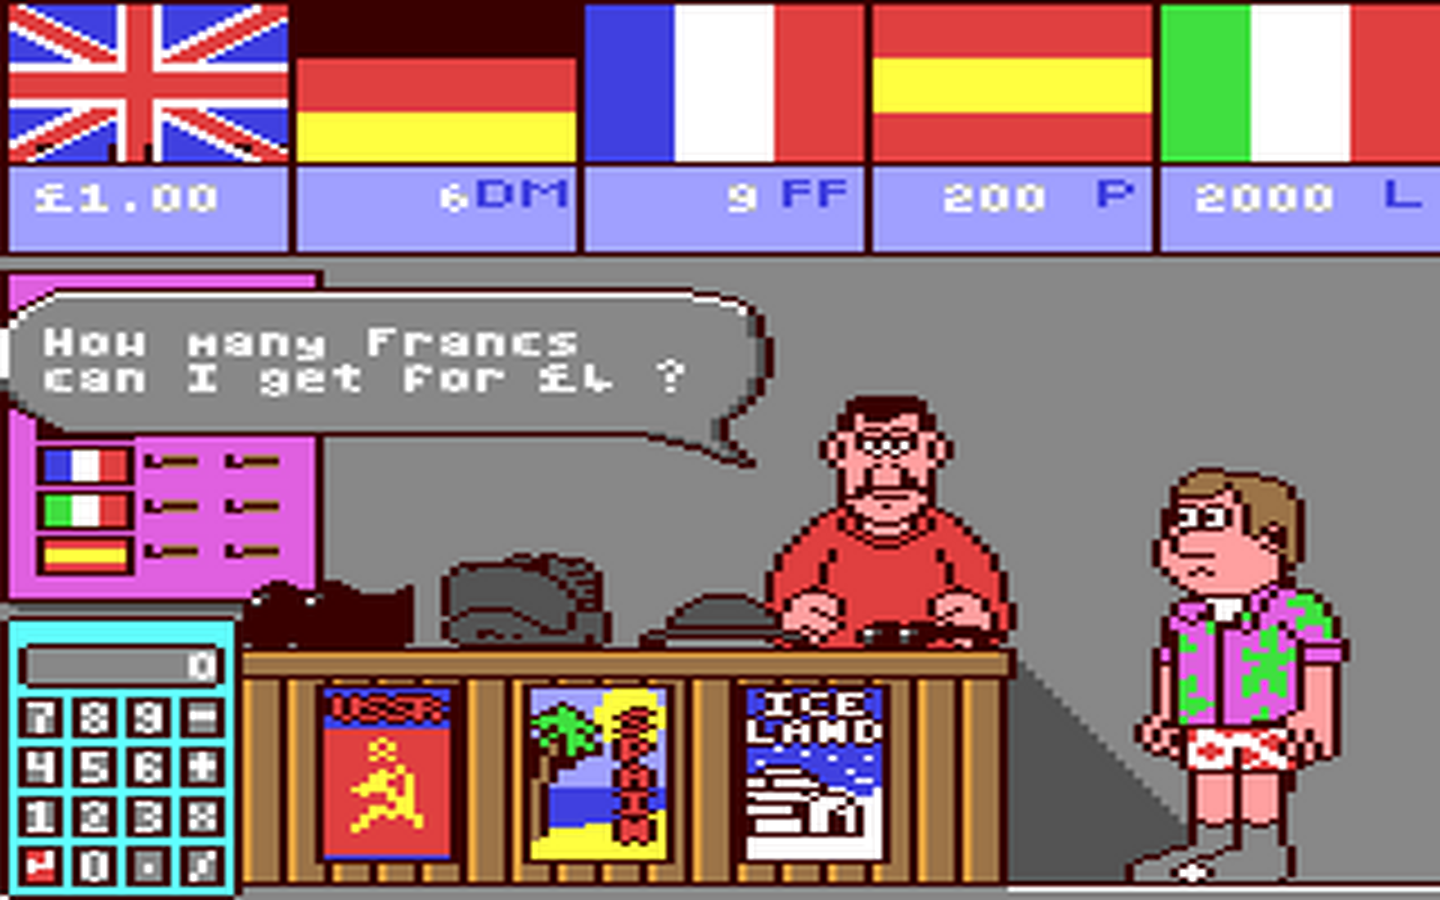 C64 GameBase Fun_School_IV_(for_the_over_7's) EuroPress_Software 1992